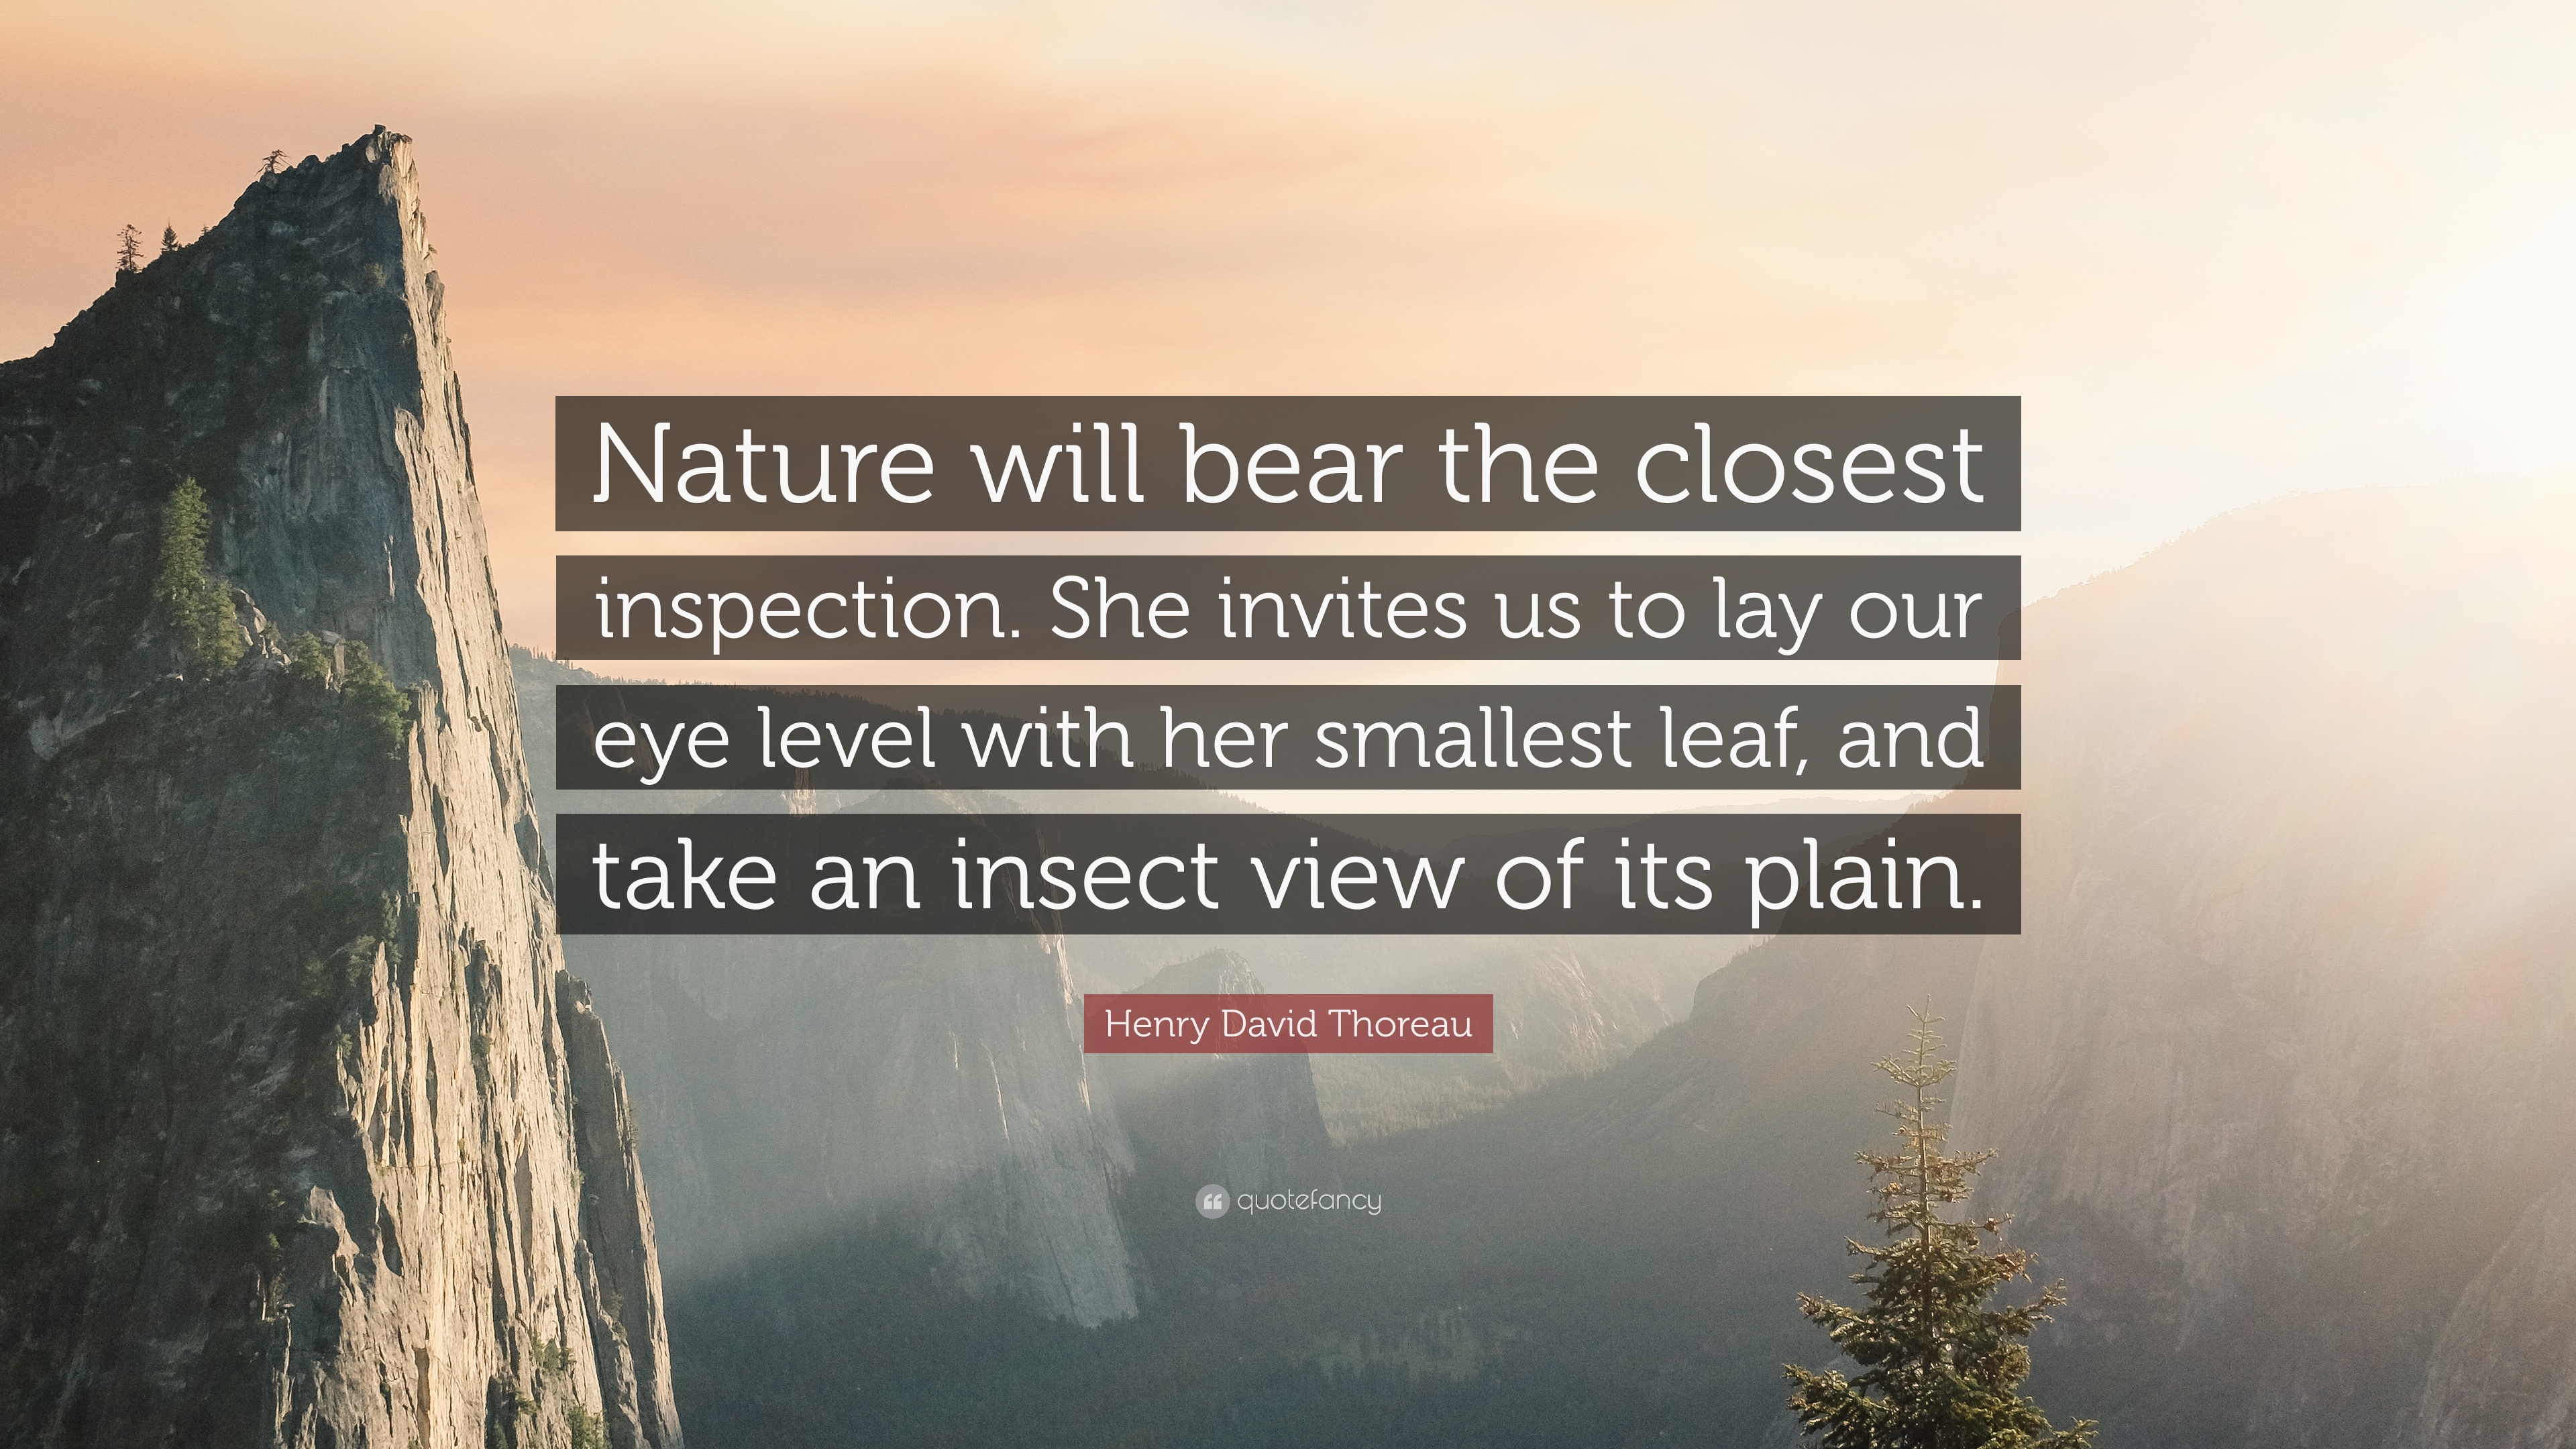 Henry David Thoreau Quote: “Nature will bear the closest inspection ...